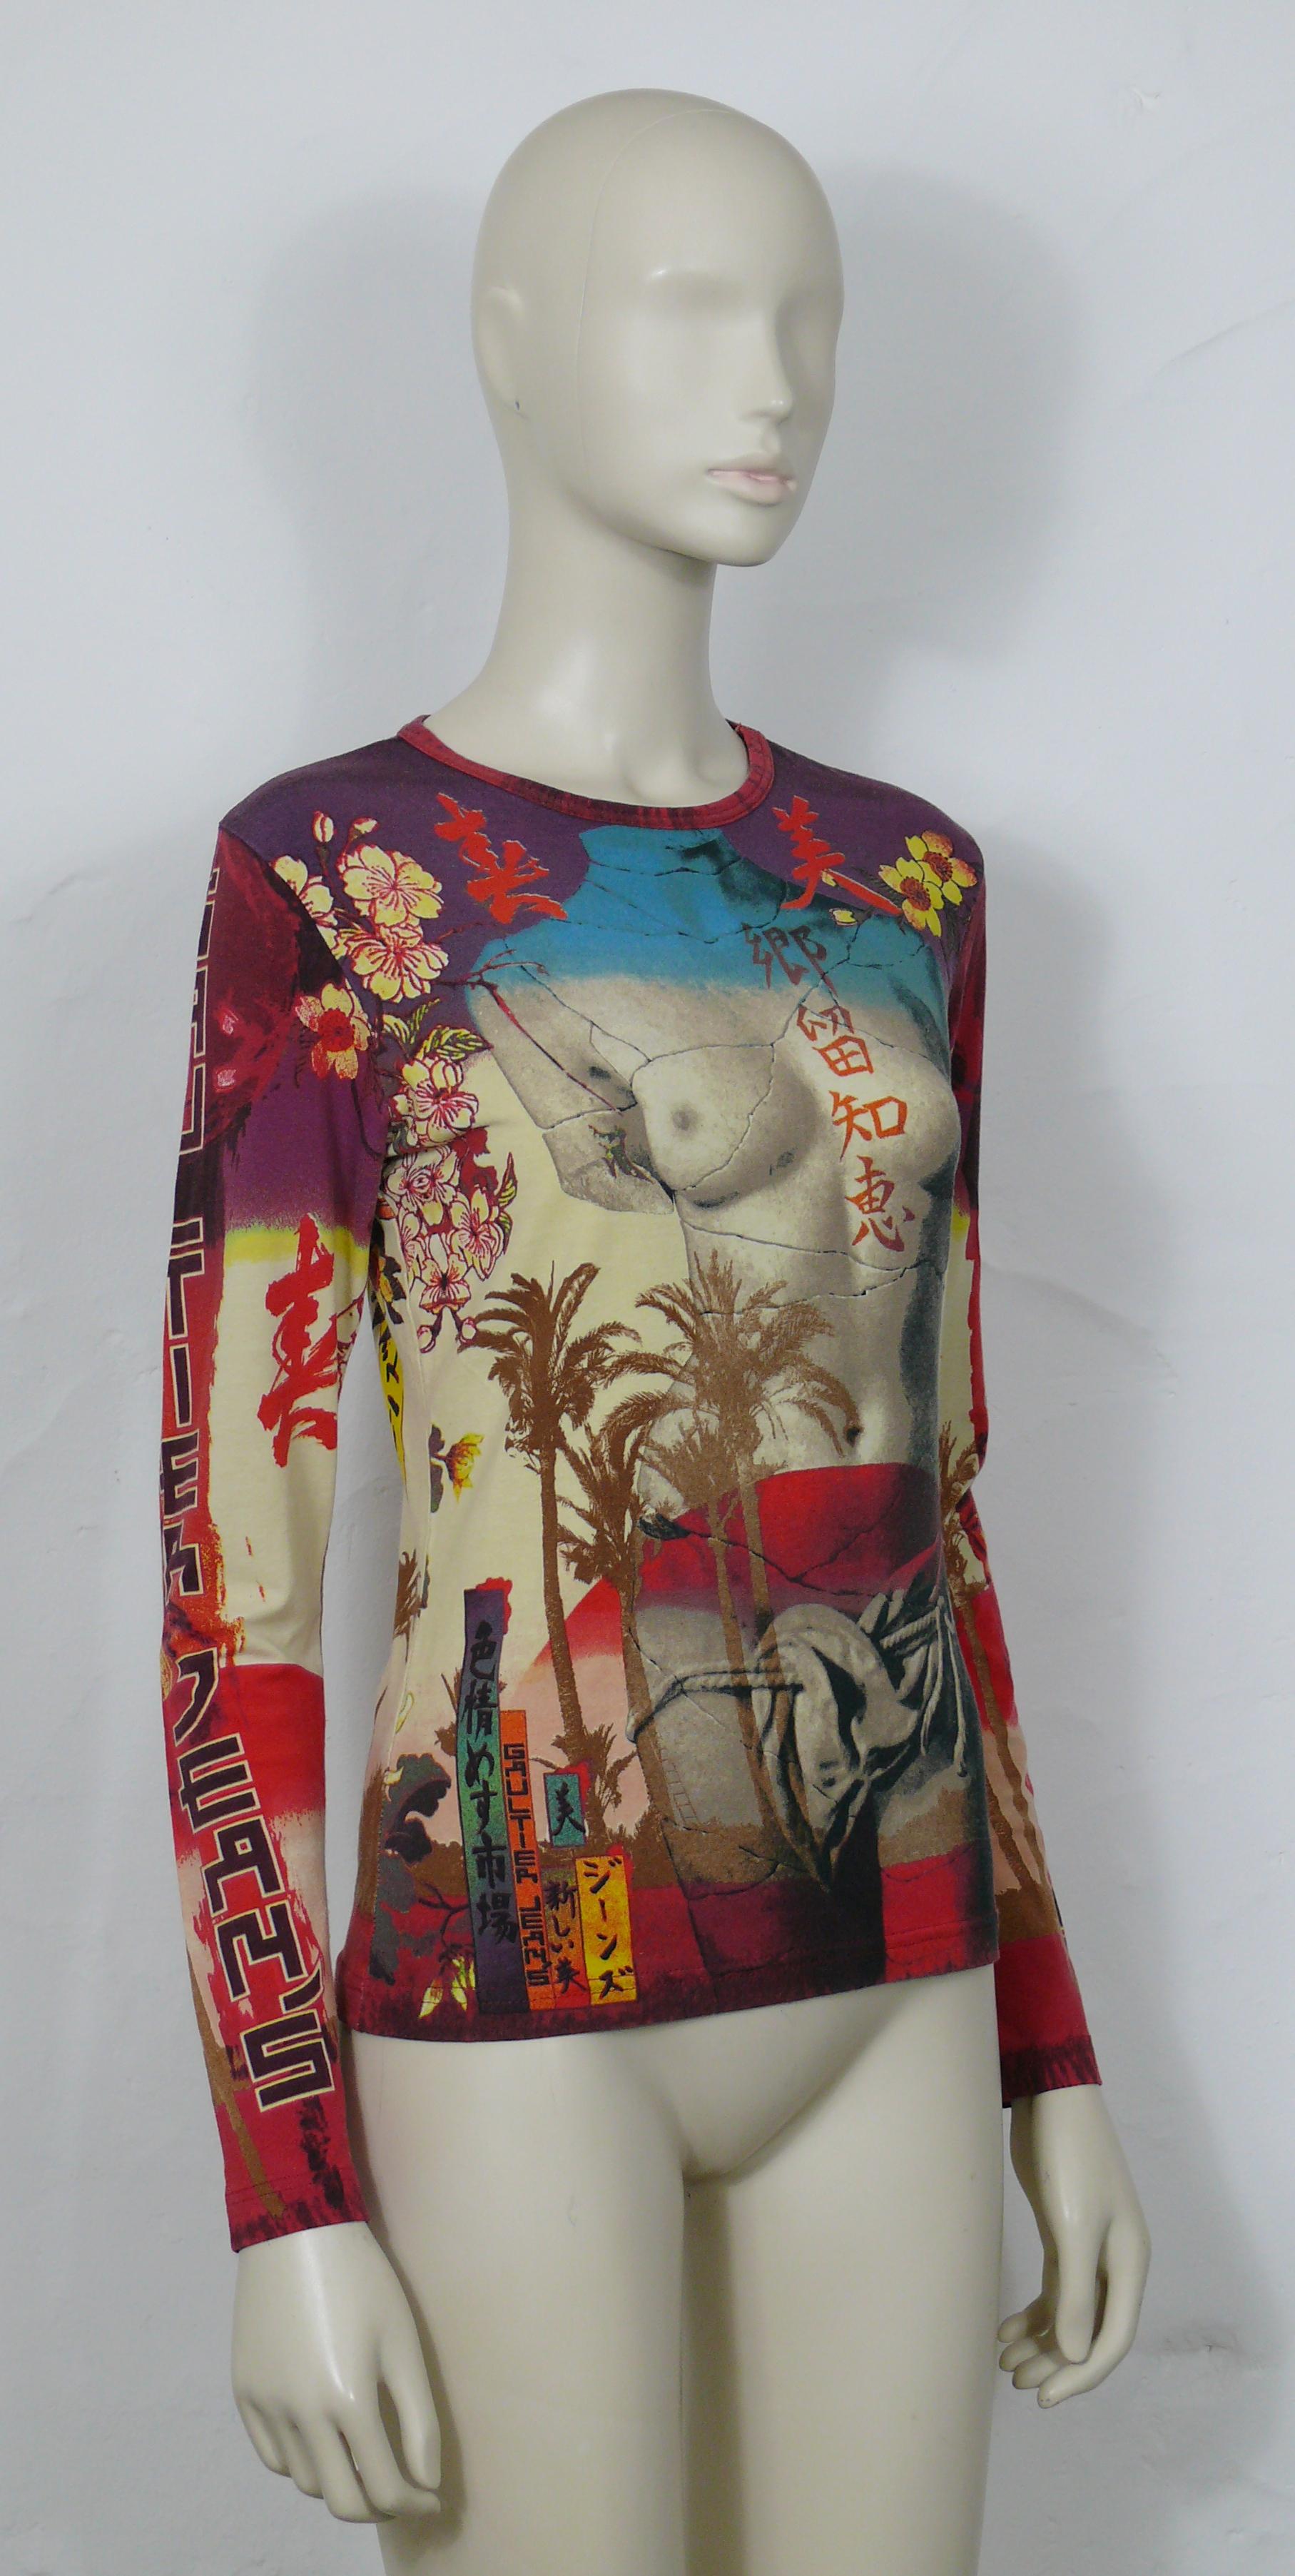 JEAN PAUL GAULTIER vintage top featuring a broken marble VENUS bust surrounded by palm trees, Japanese calligraphy, GAULTIER JEAN'S logo spelled out in Japanese style letters, cherry blossoms, butterflies and rising suns.

Label reads GAULTIER